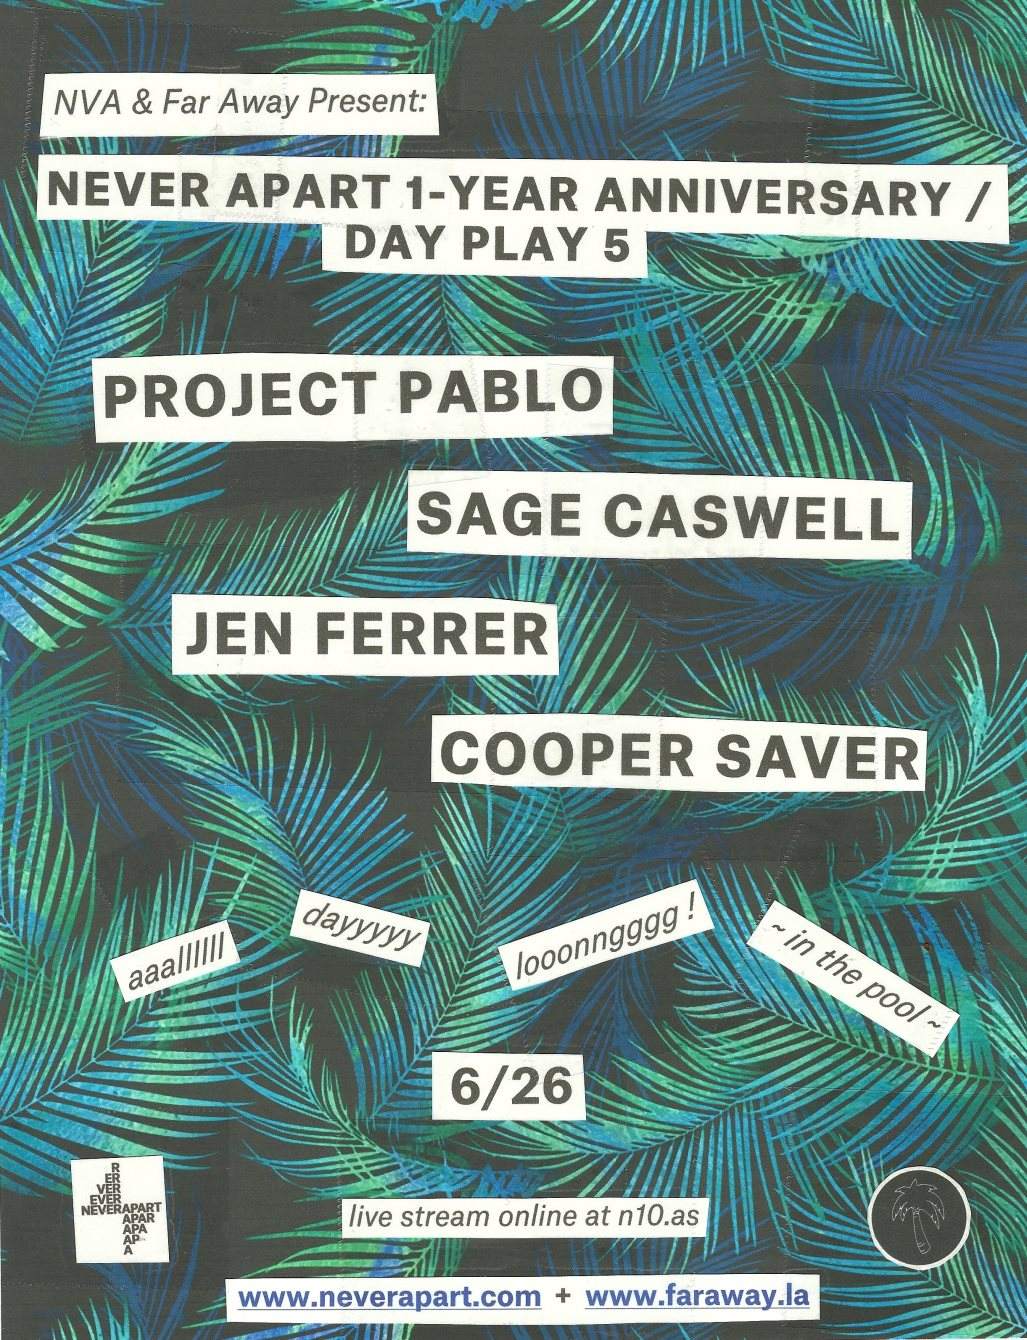 Day Play 5: Project Pablo / Sage Caswell / Cooper Saver / Jen Ferrer - フライヤー表